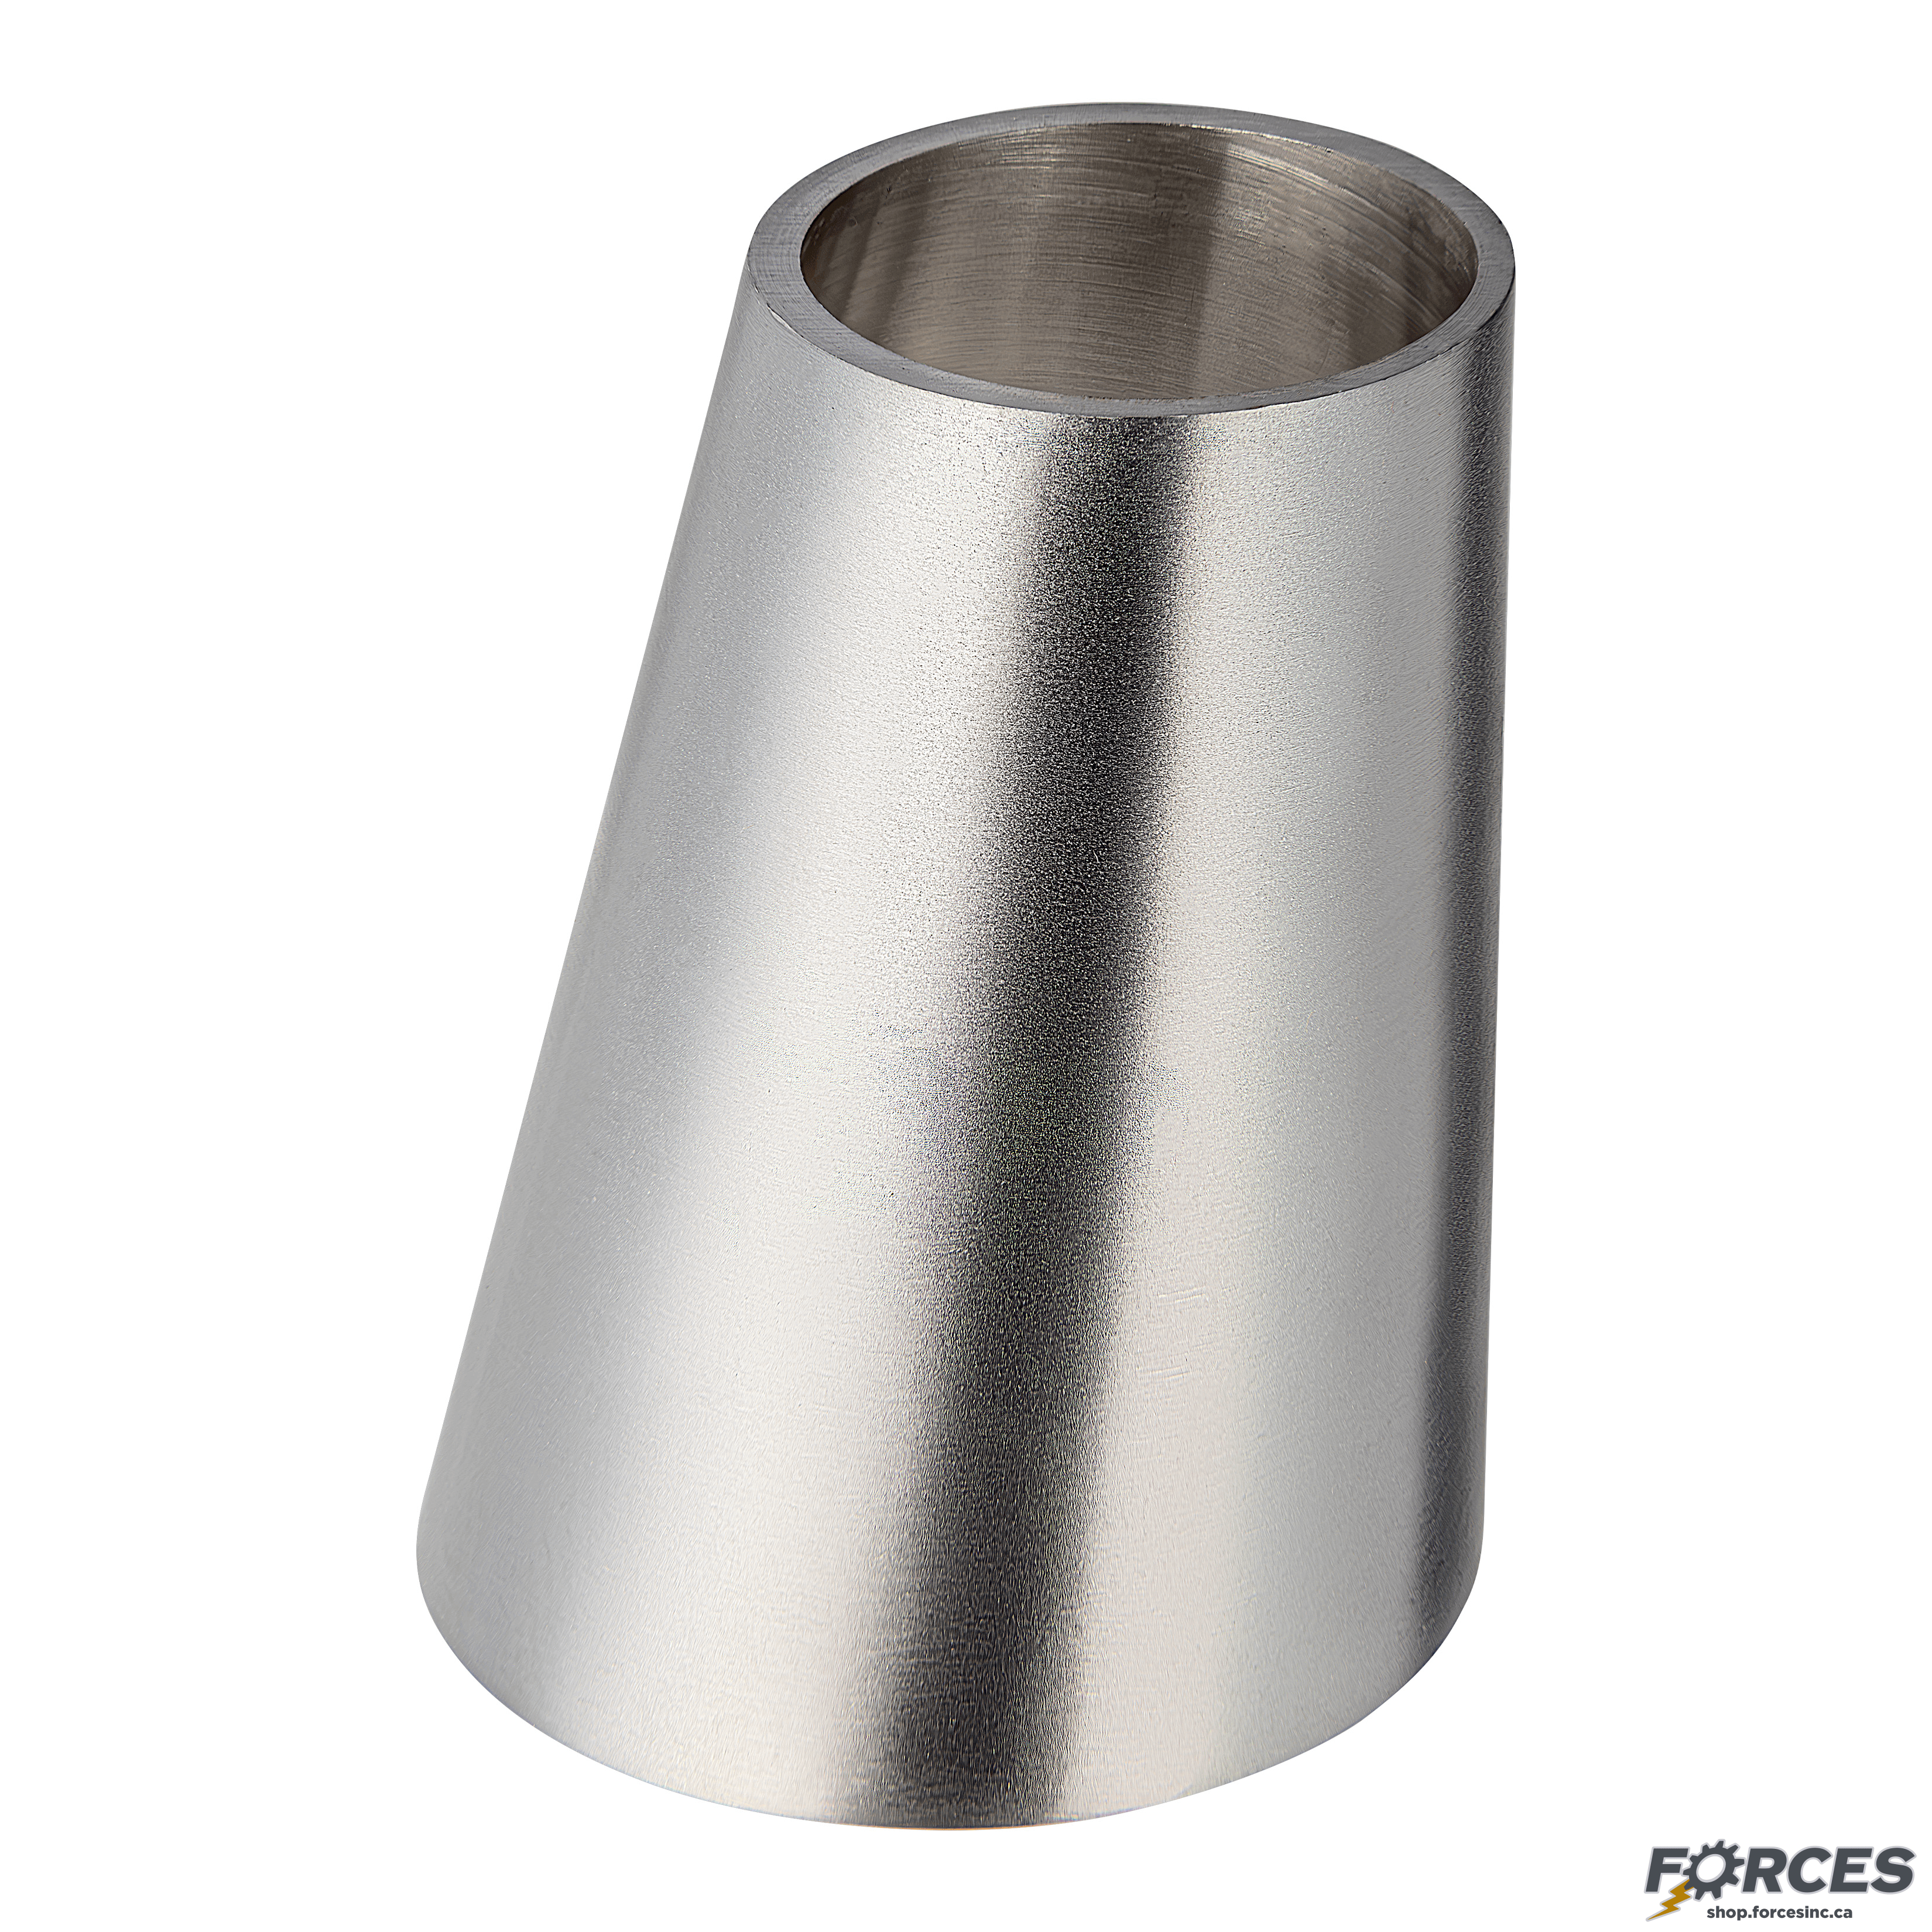 2-1/2" x 2" Butt Weld Eccentric Reducer - Stainless Steel 316 - Forces Inc